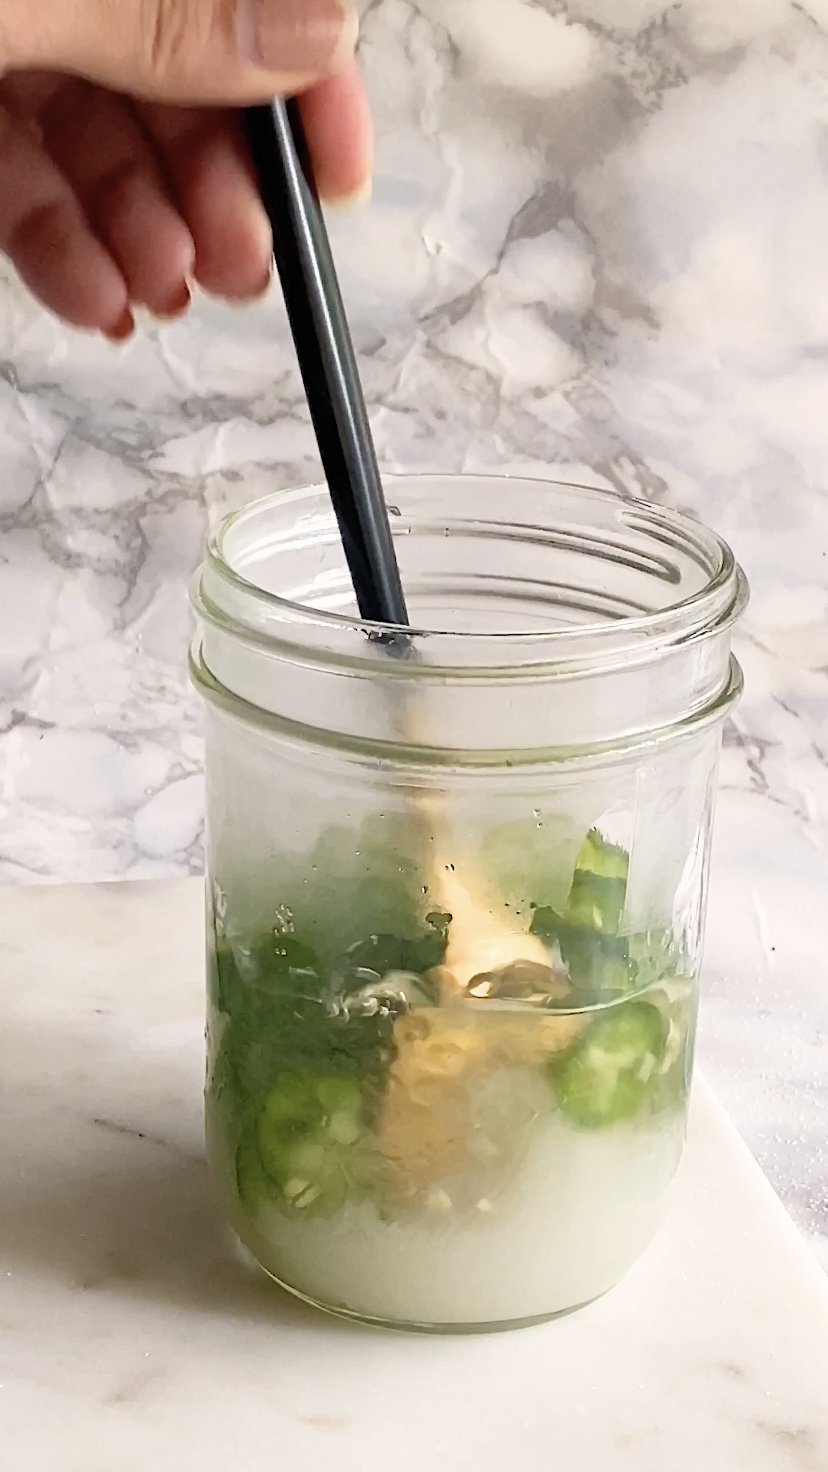 A spoon stir a jar of jalapeno slices, sugar, and water.